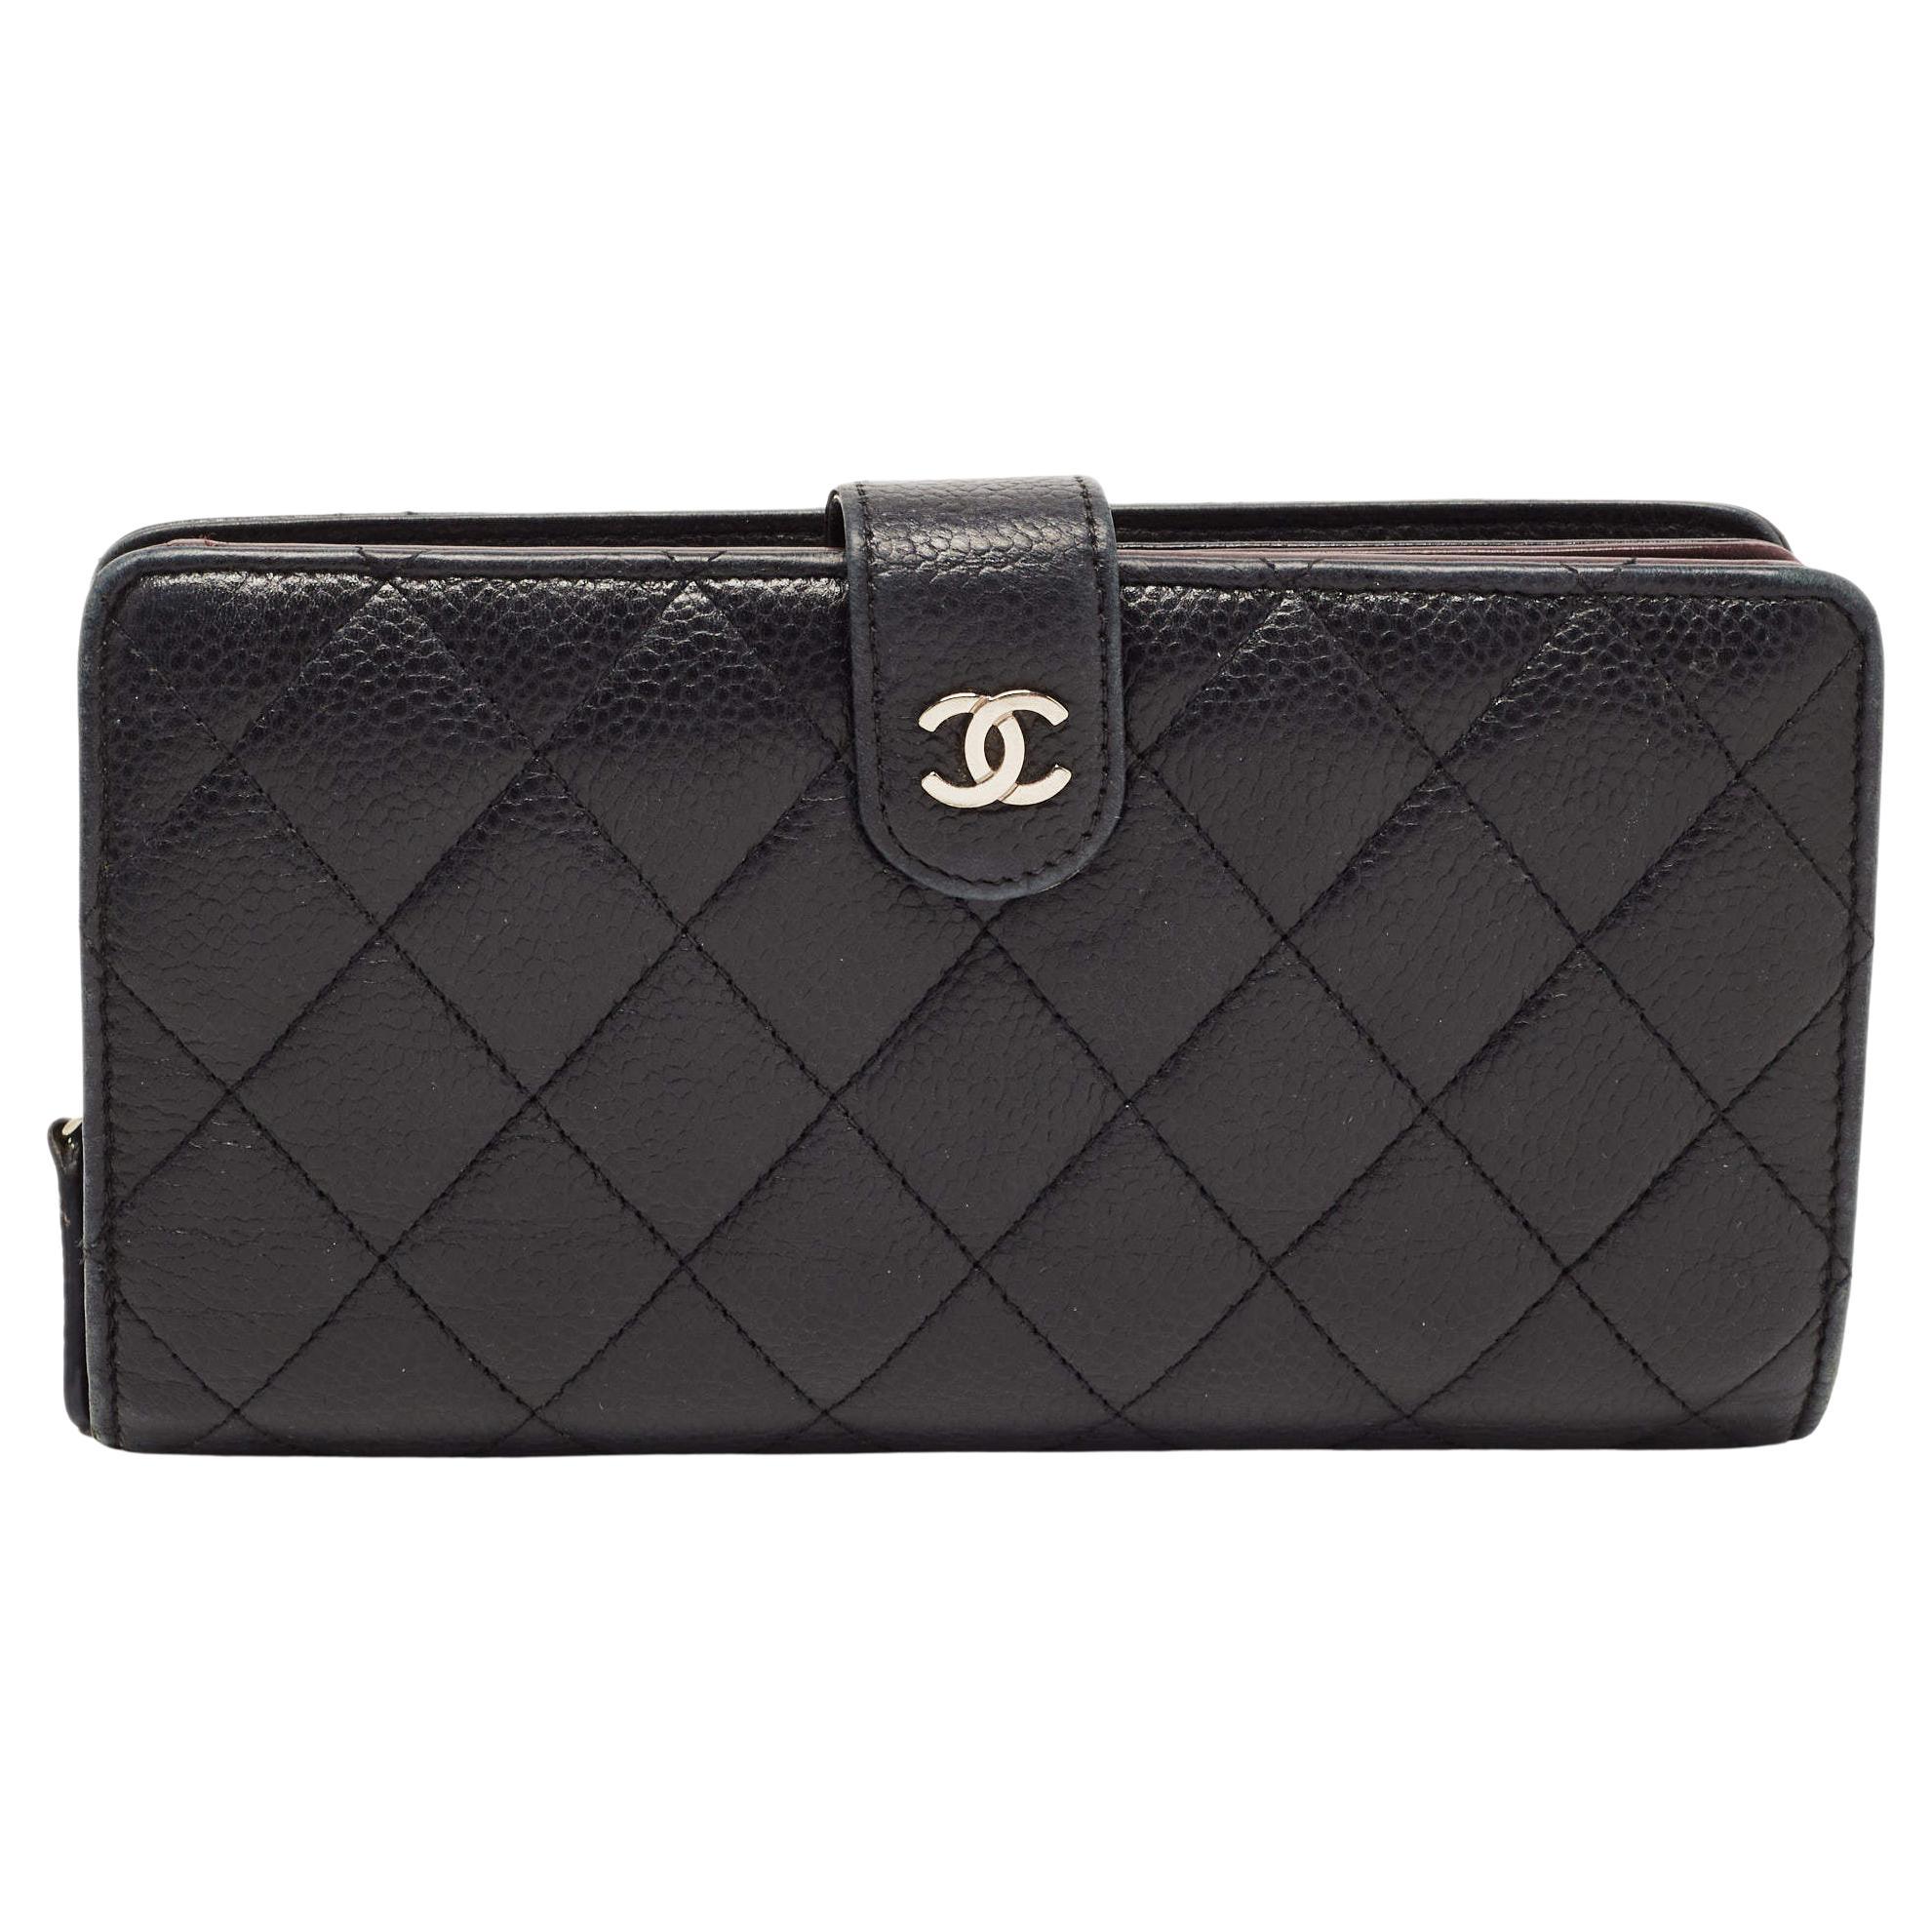 Chanel Black Quilted Caviar Leather CC Continental Zip Wallet at